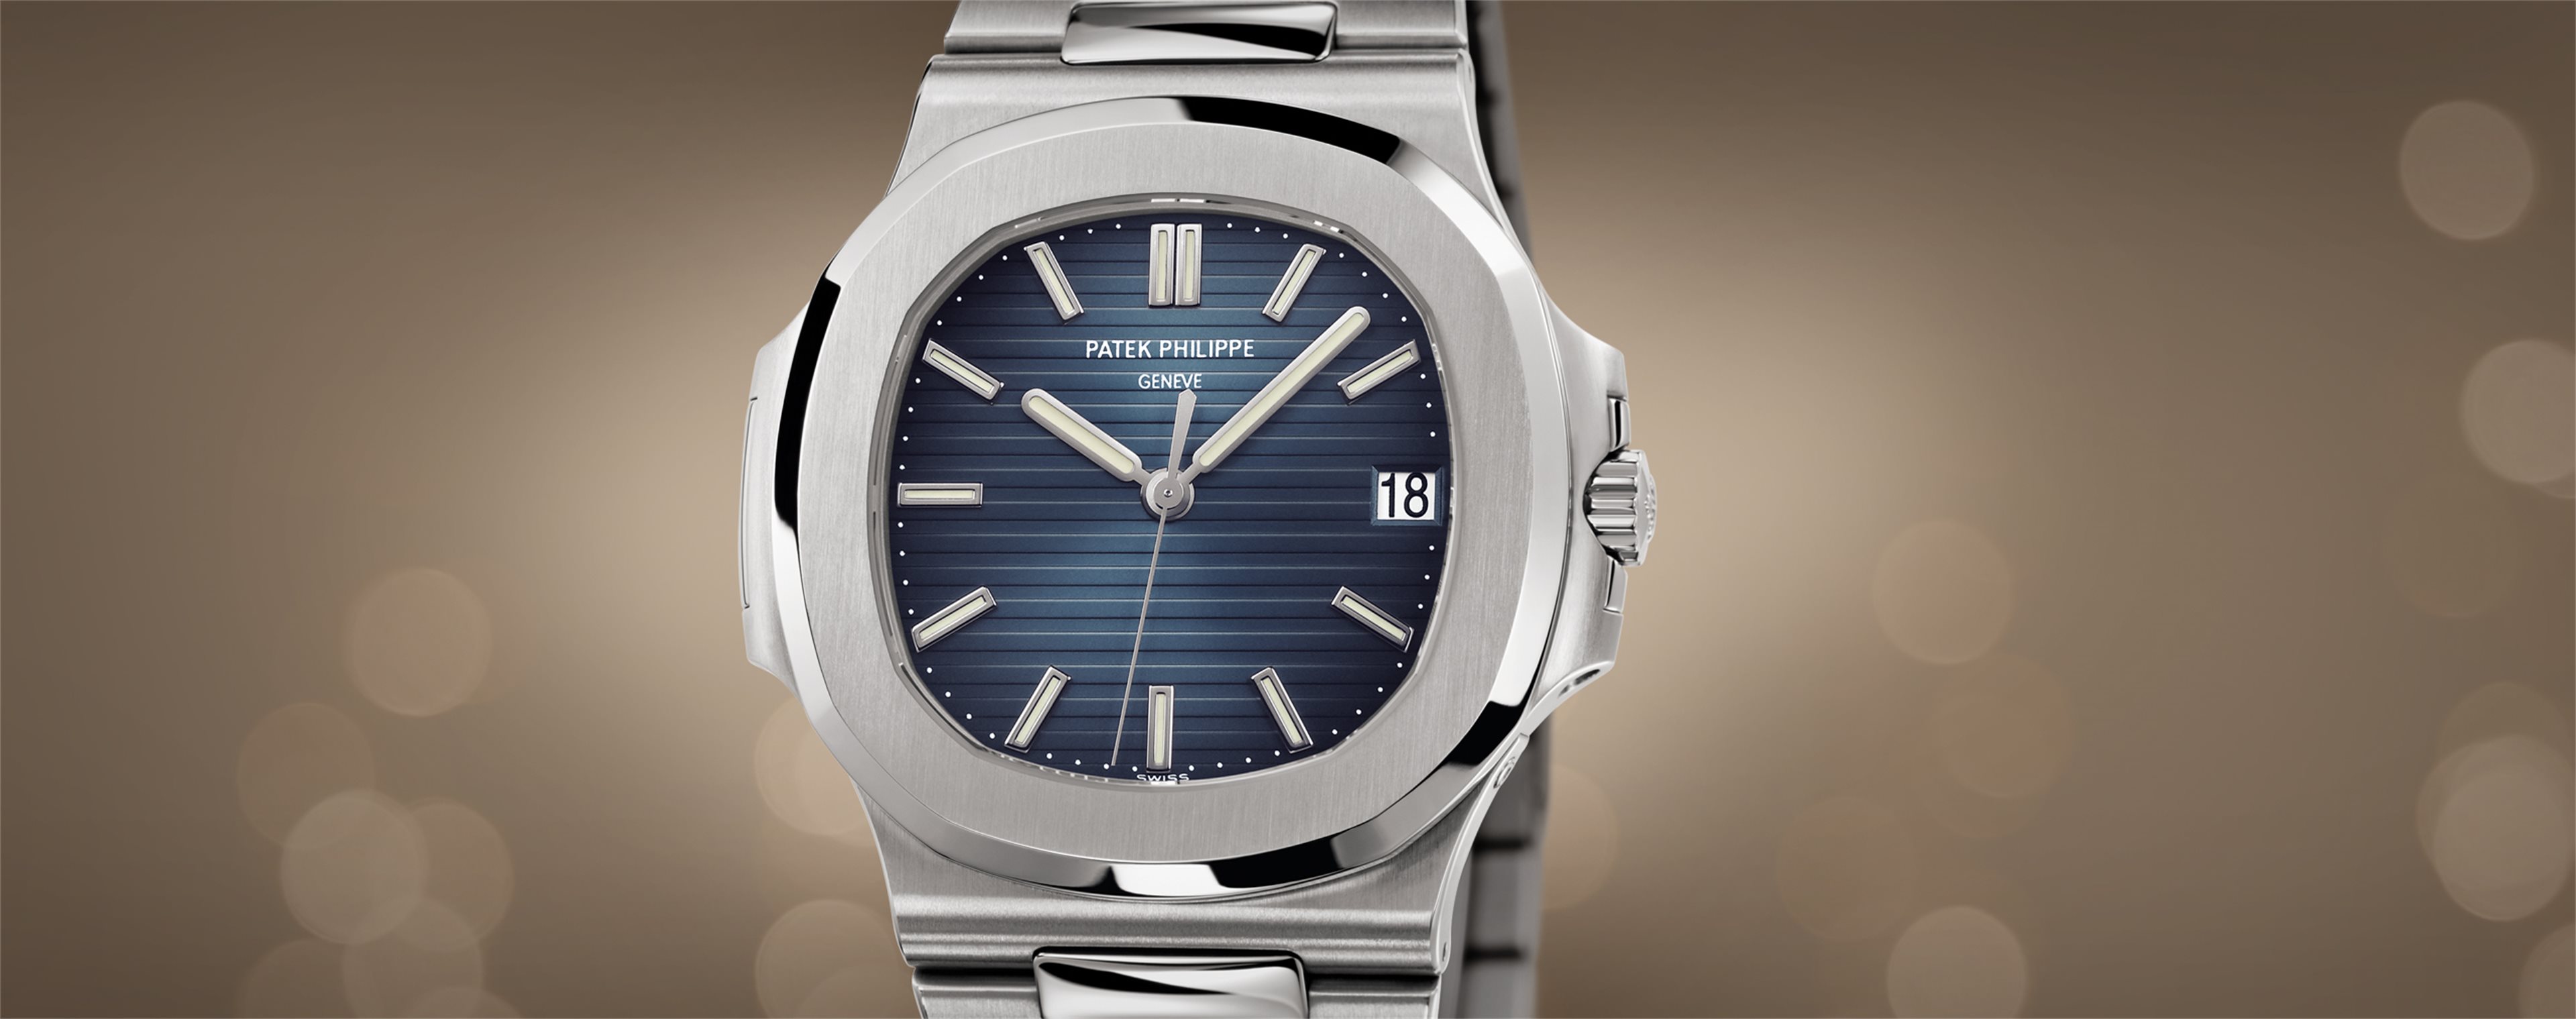 Replicas Longines Watches